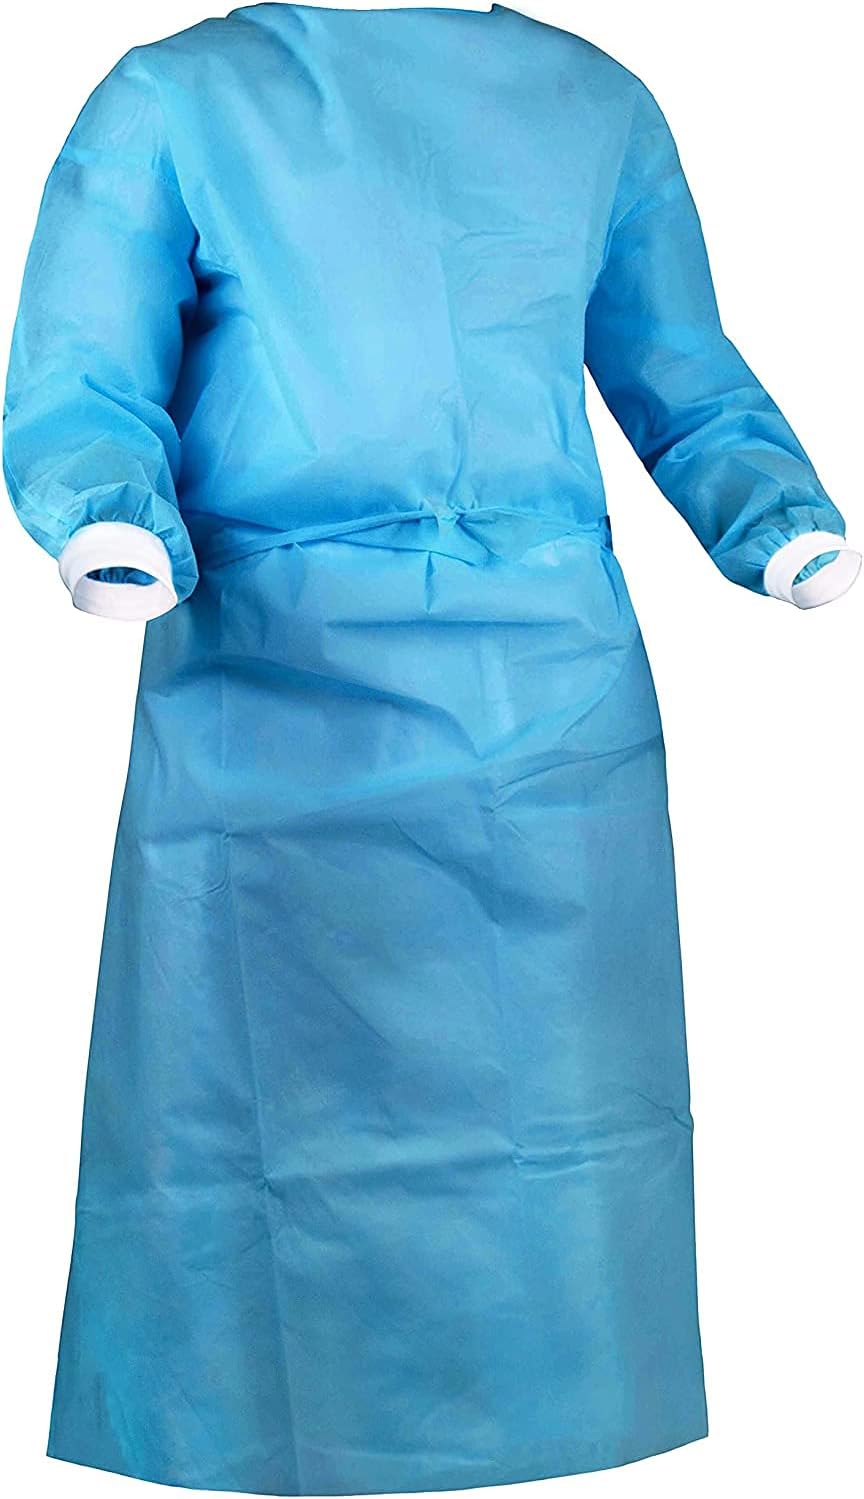 BH Supplies 20-Pack Level 2 Disposable Isolation Gown BH Supplies Fully Closed Double Tie Back and Front, PP